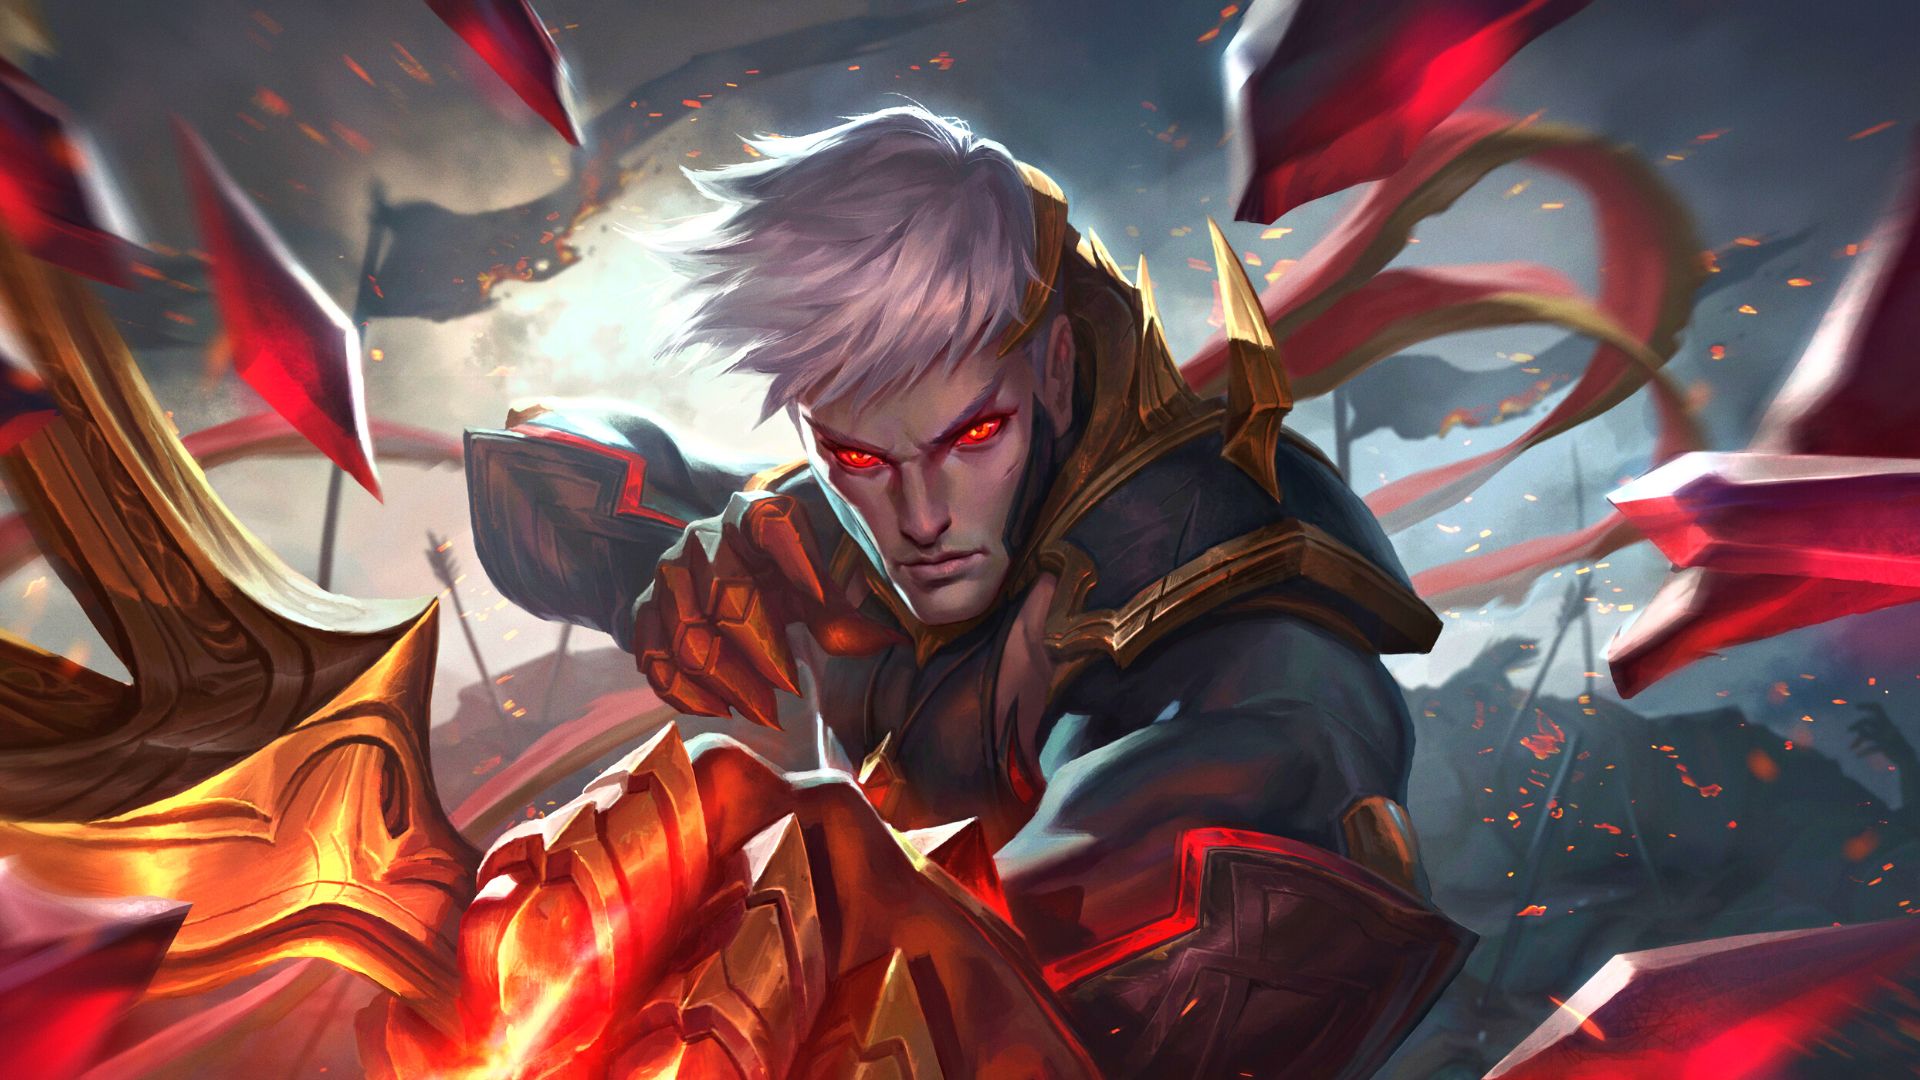 Get Exclusive Content from Riot Games with Game Pass